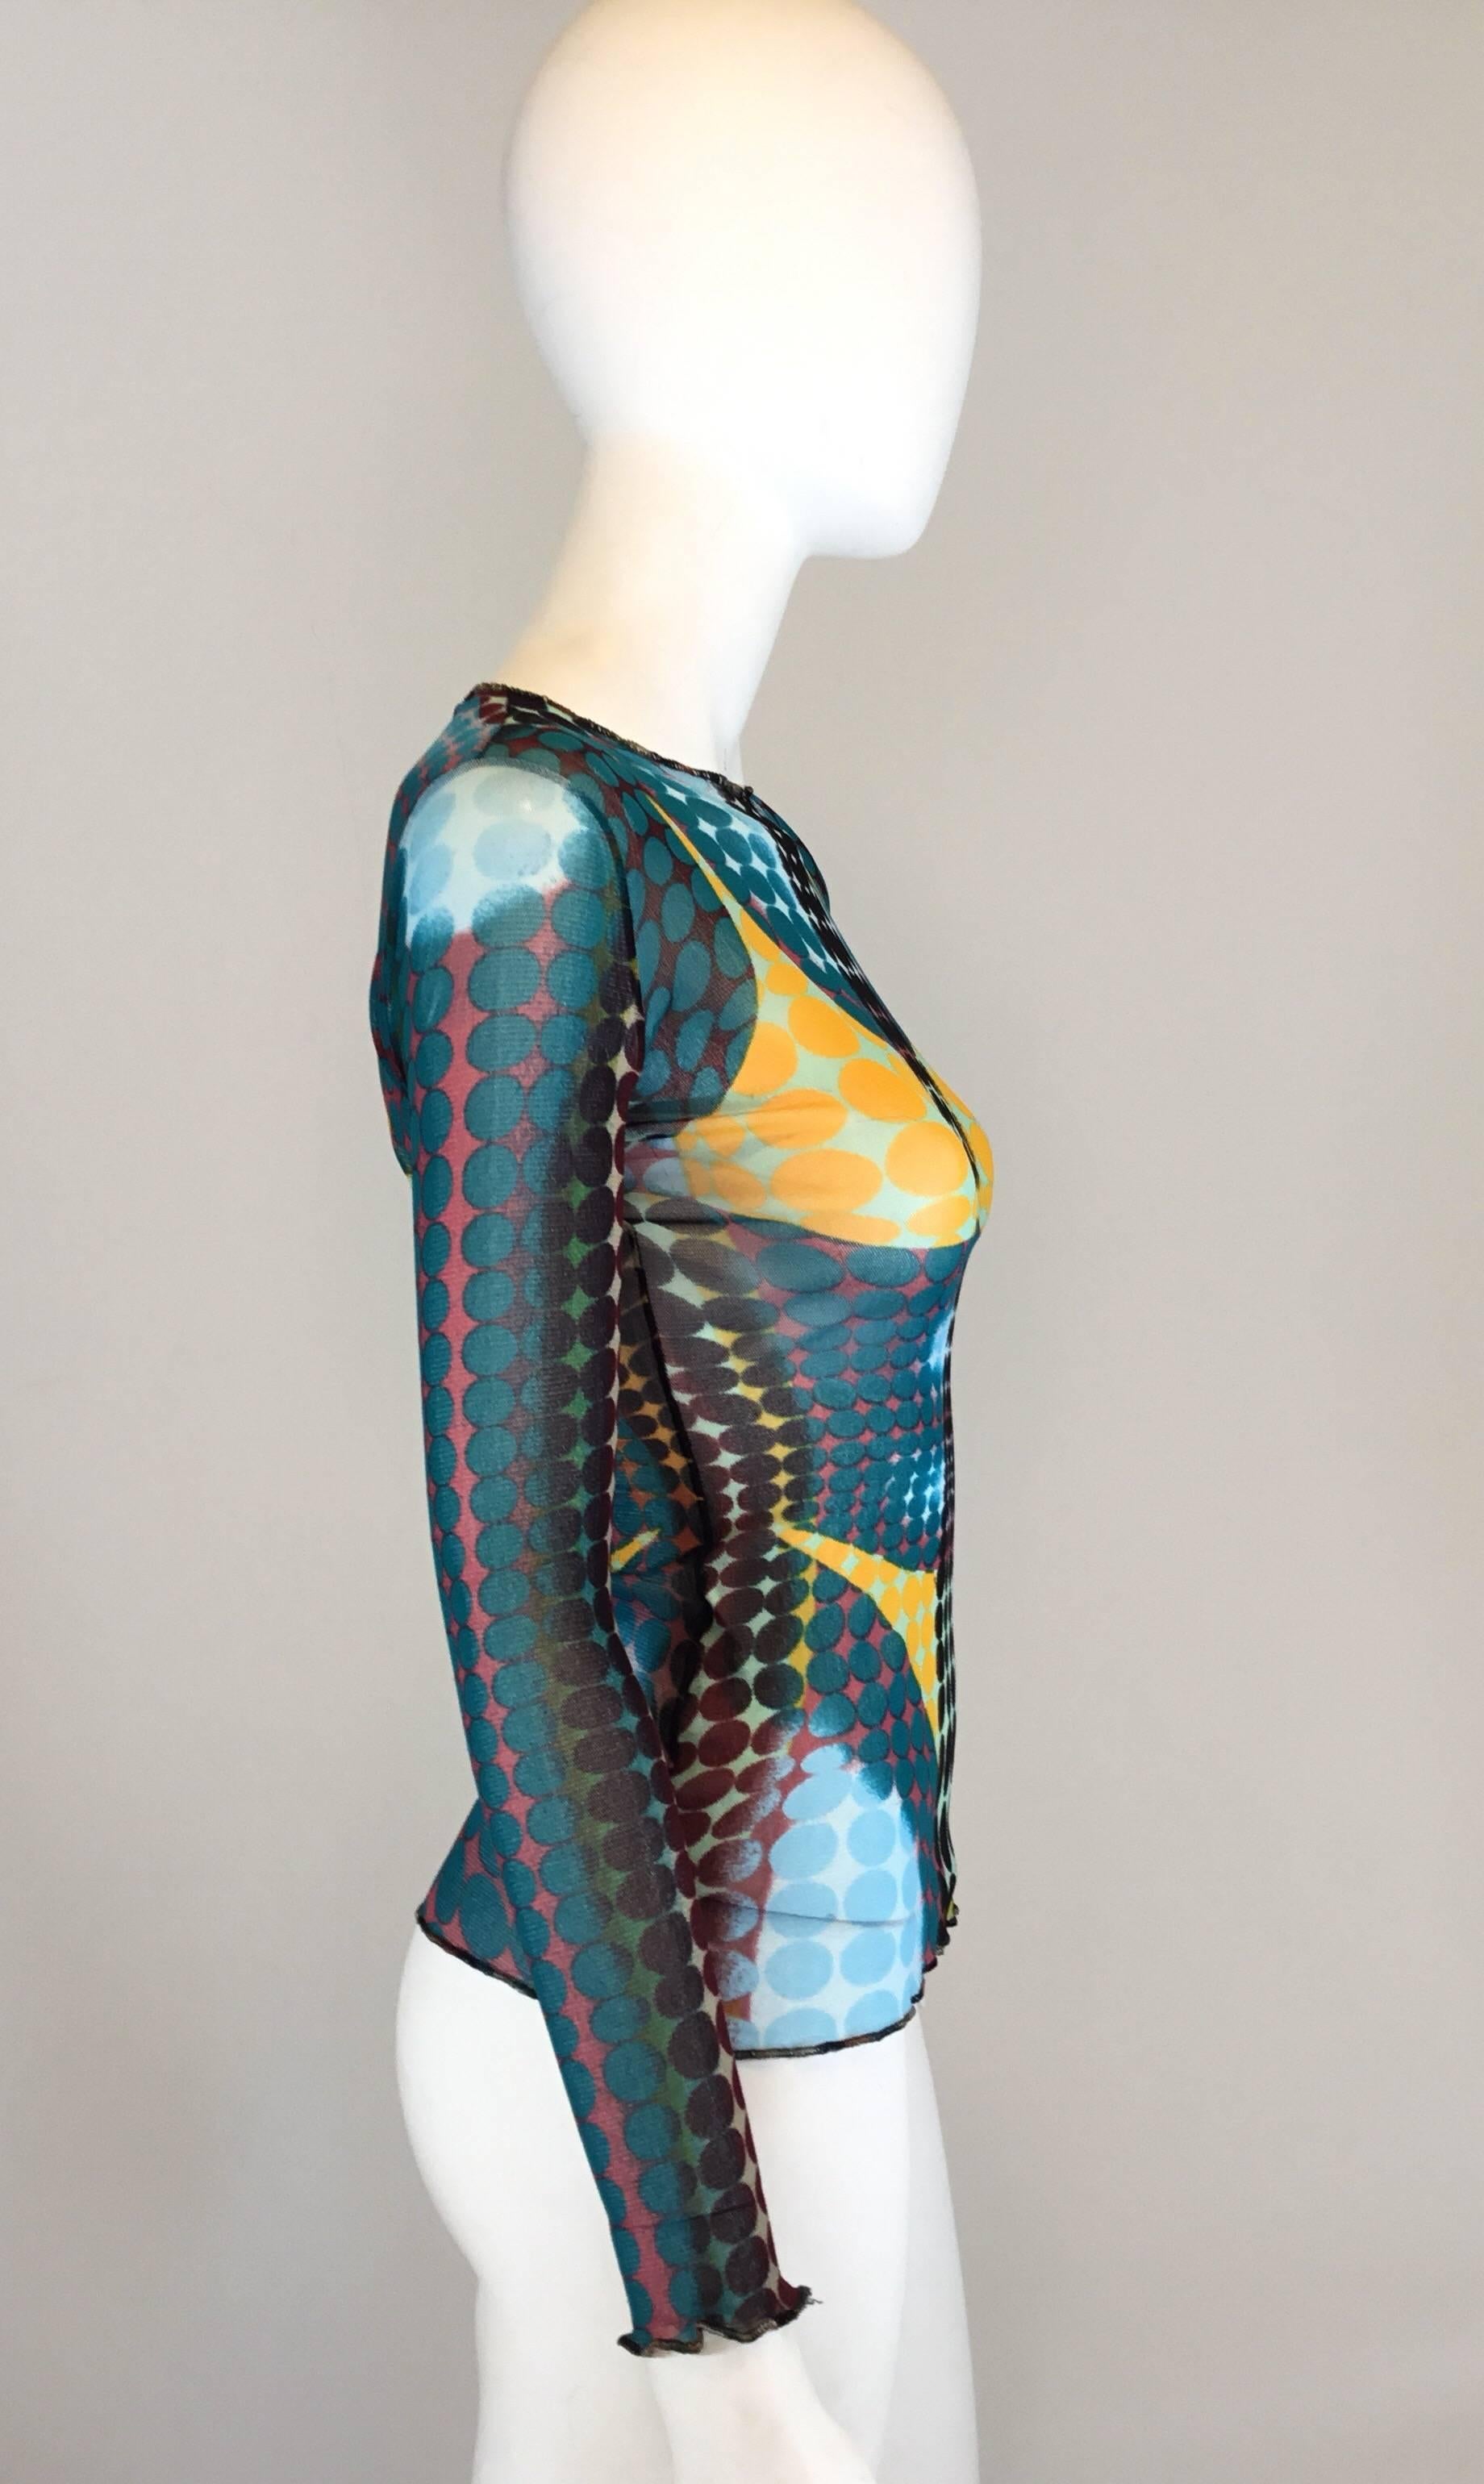 Jean Paul Gaultier top features a multicolored print that creates the illusion of a bikini. Made of 100% nylon, size XL, made in Italy.

bust 31'', sleeves 22'', shoulder to shoulder 15'', length 23''